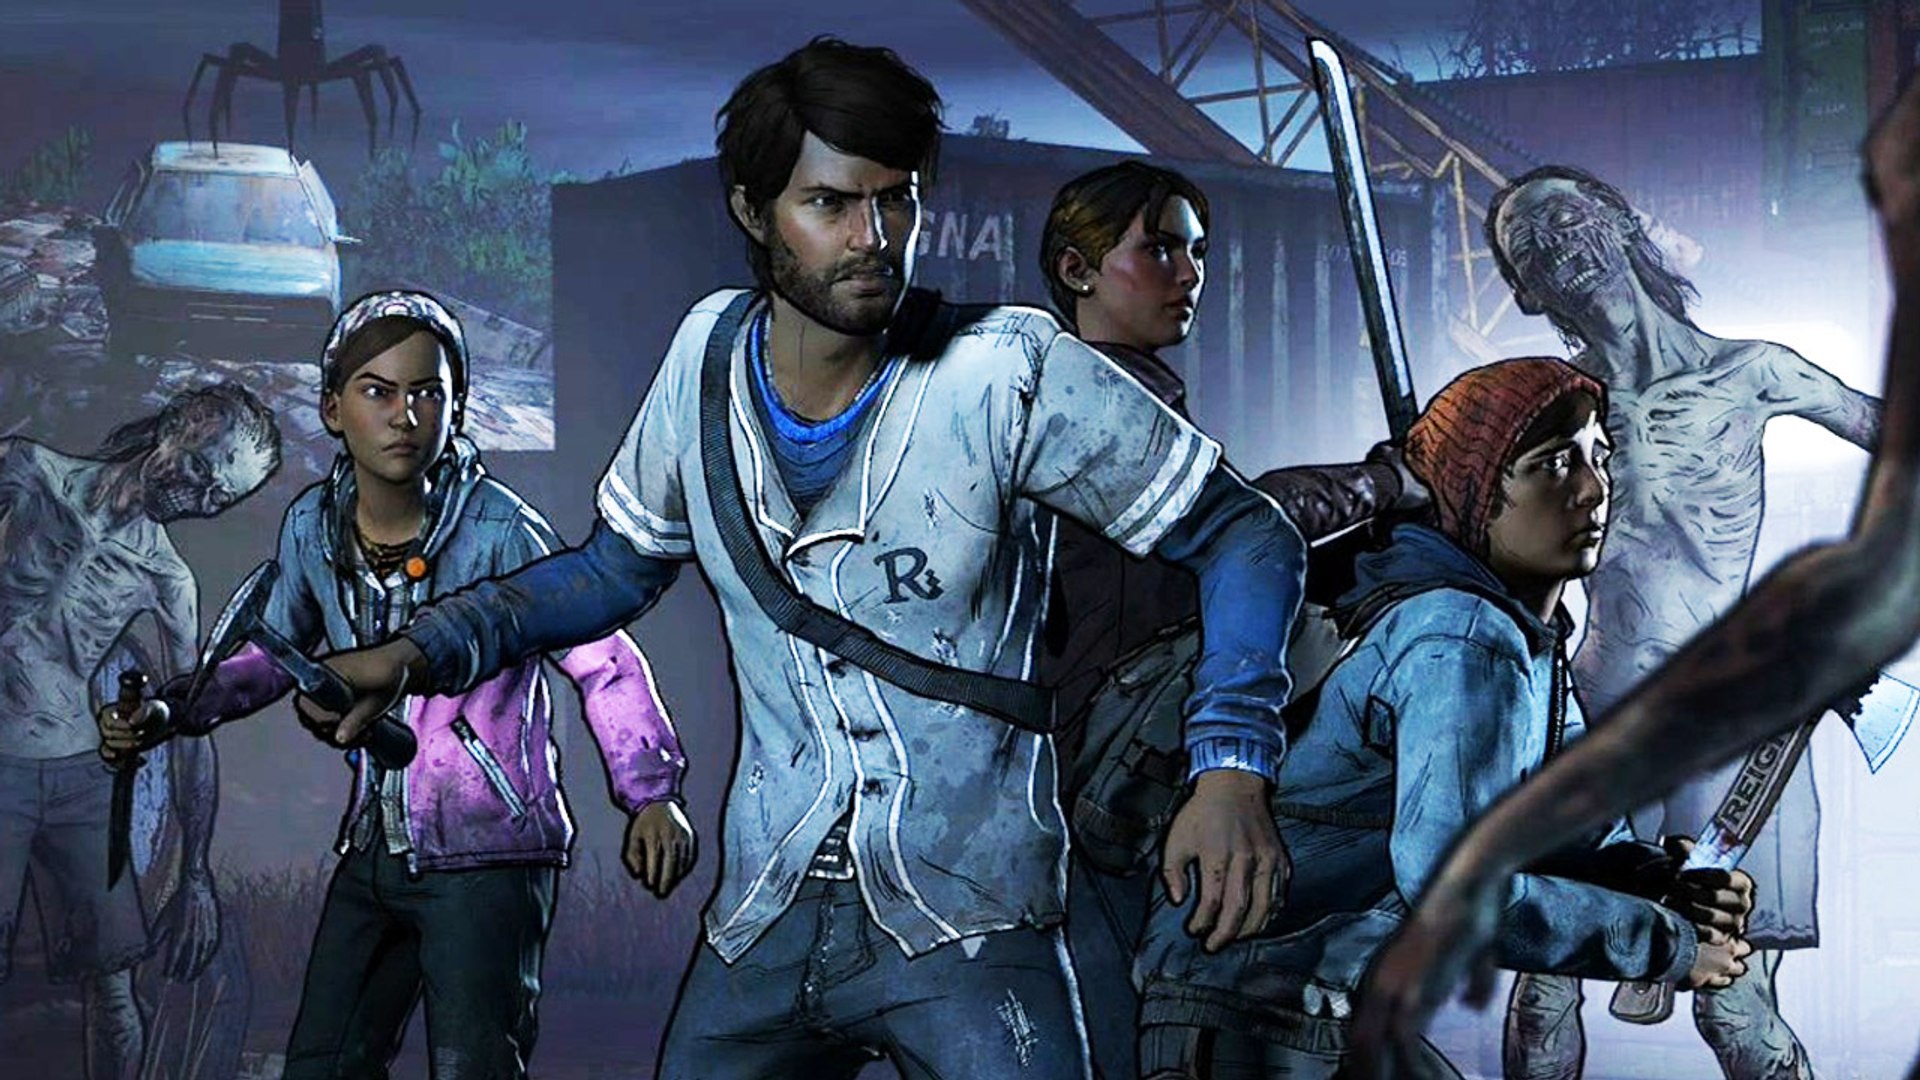 Как пройти игру dead. TWD A New Frontier. The Walking Dead: a New Frontier - Episode 1. The Walking Dead Нью Фронтир. Ходячие the New Frontier.